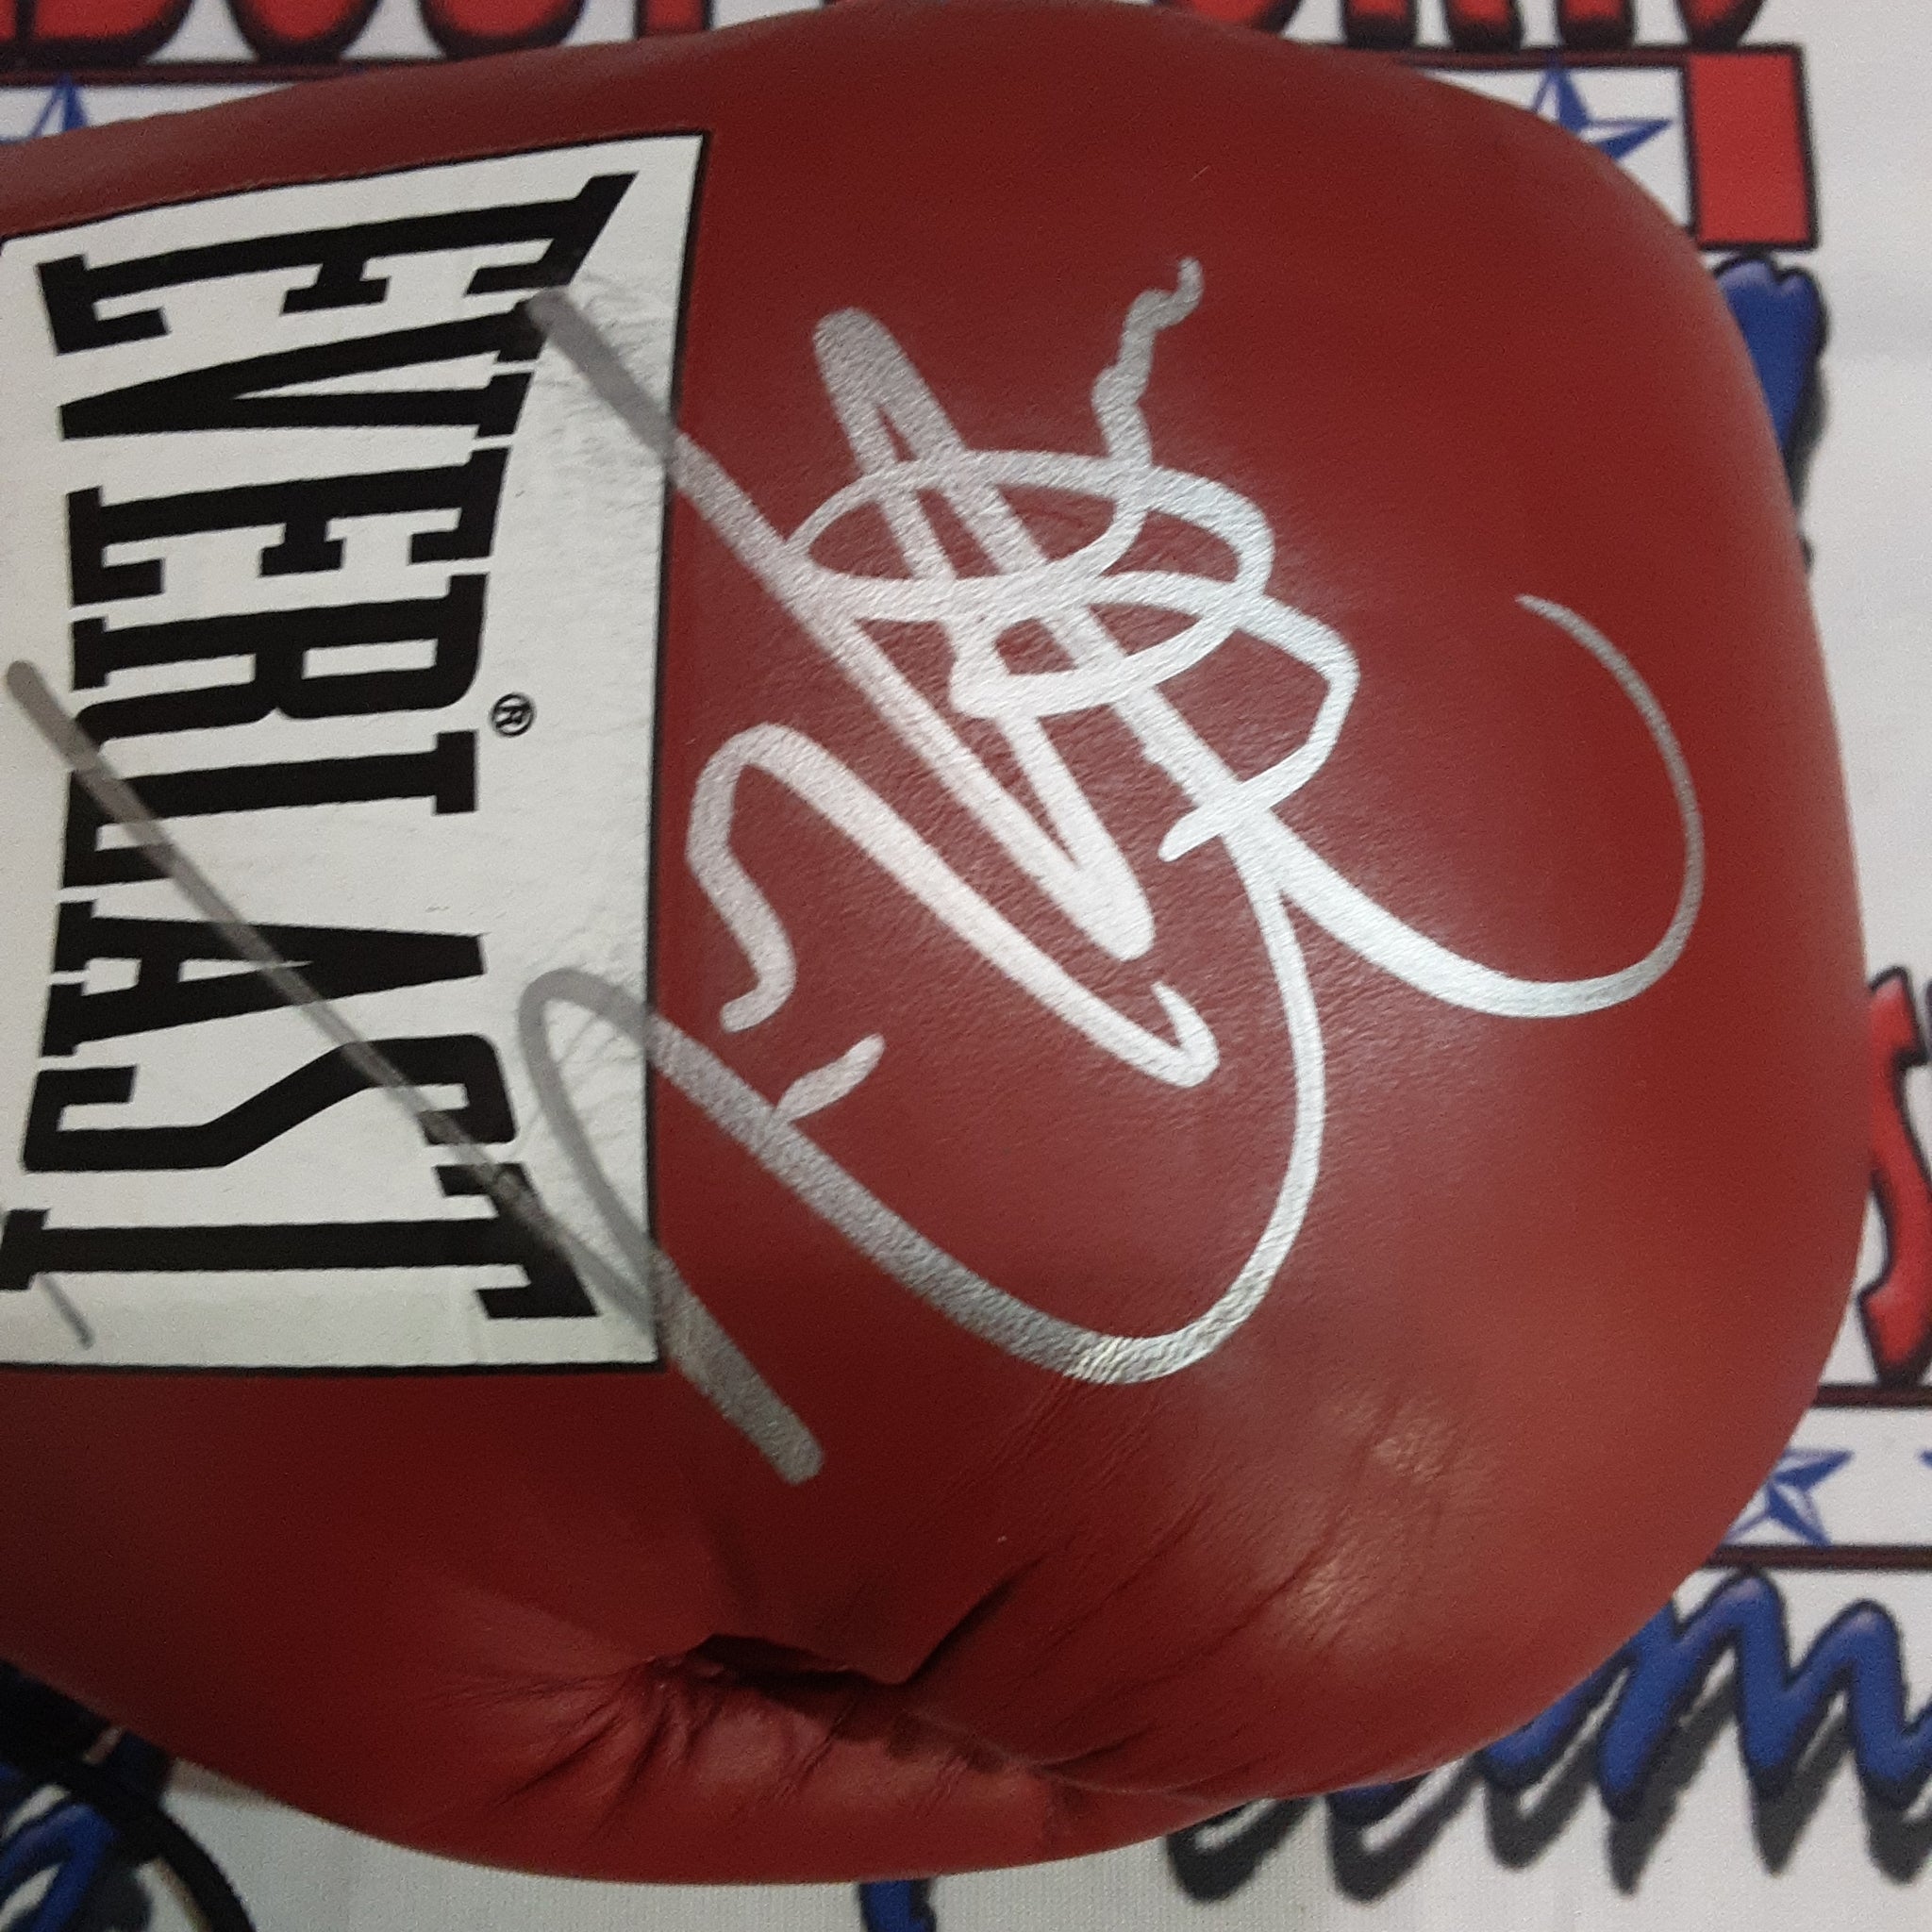 Sylvester Stallone and Antonio Tarver Authentic Signed Boxing Glove Autographed JSA